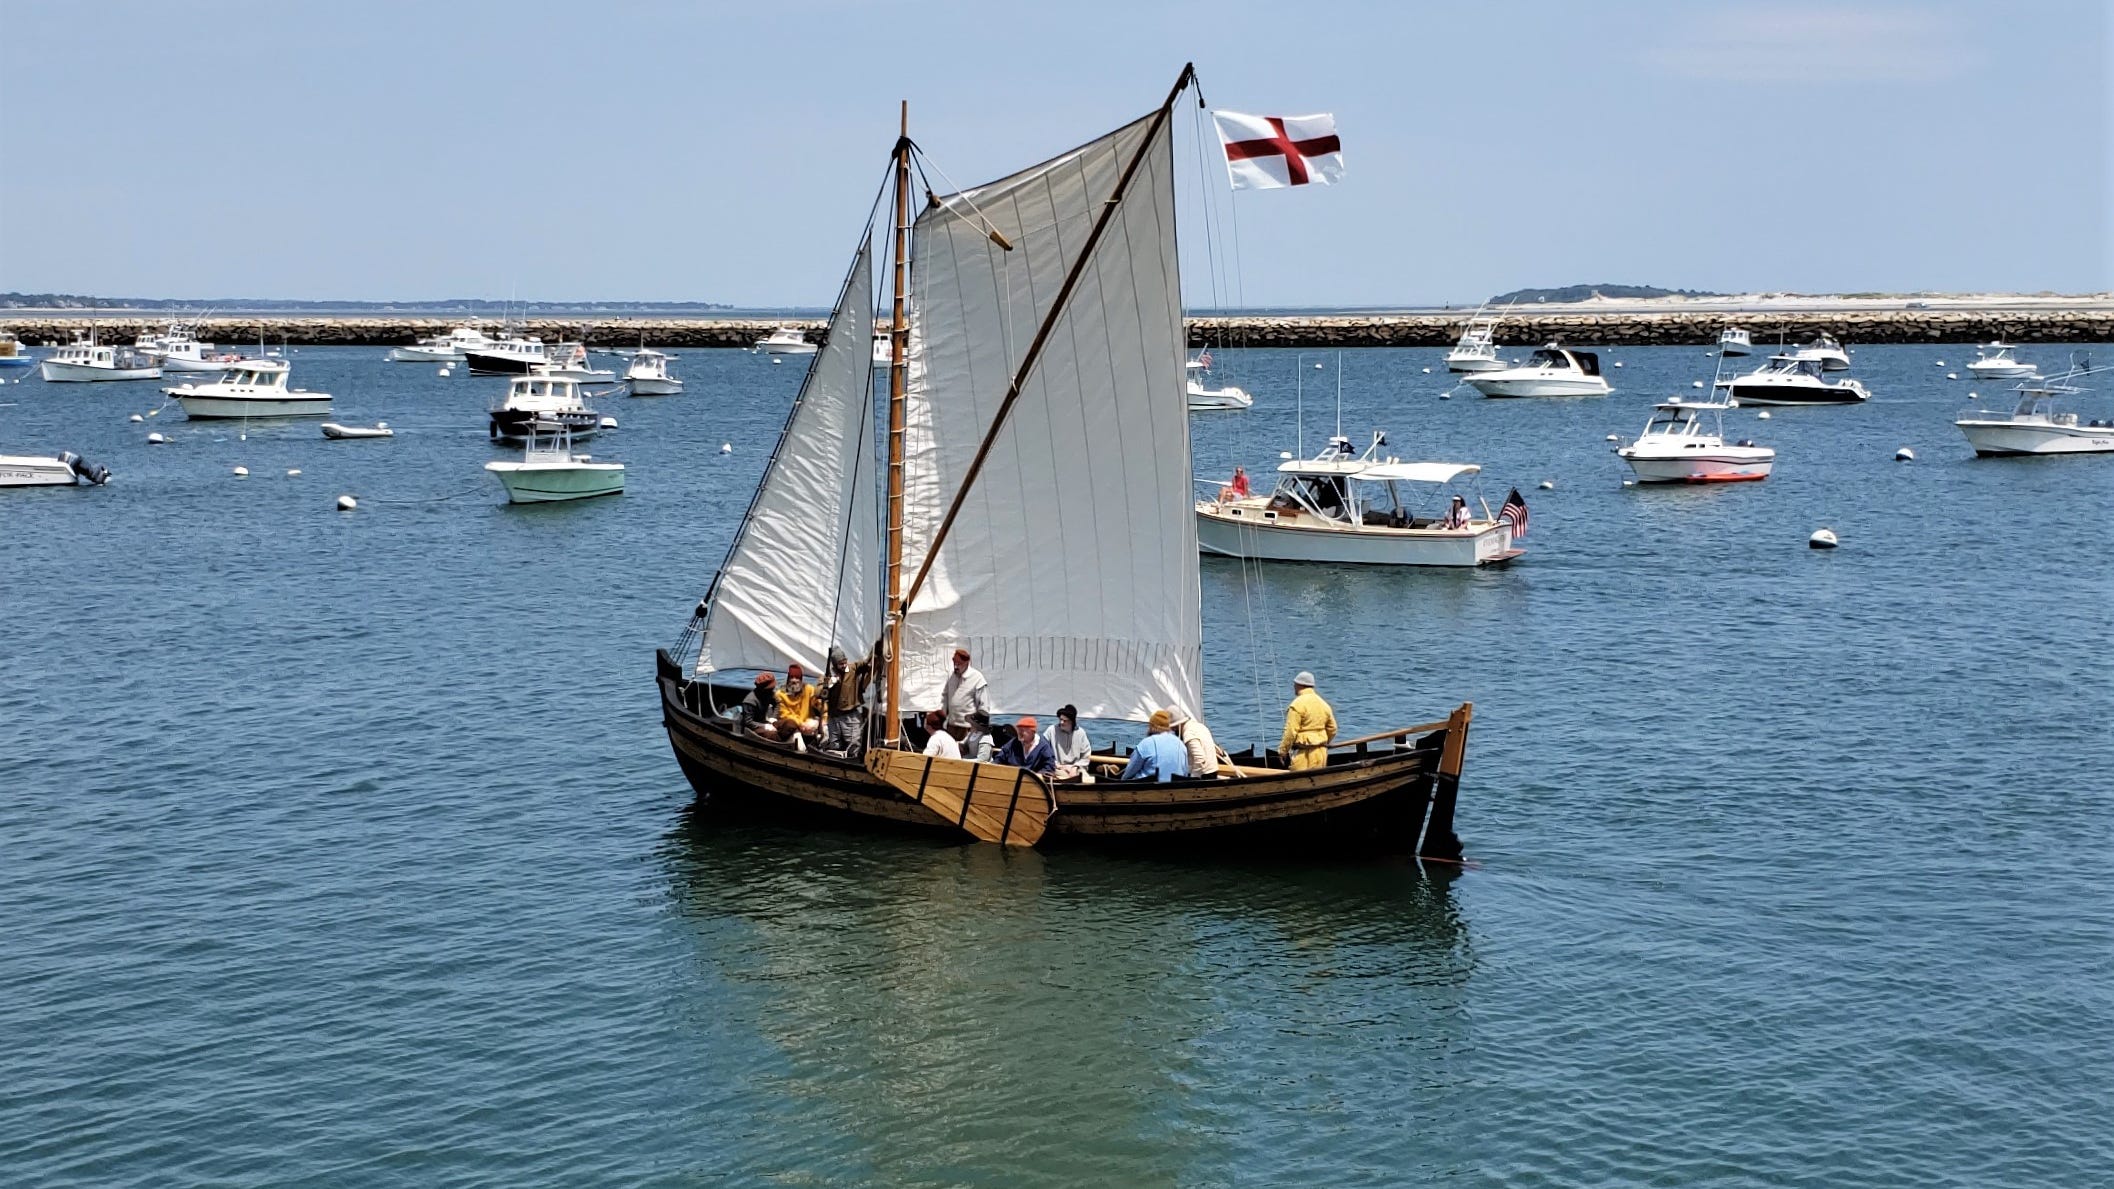 Fully restored Shallop returns to Plymouth Harbor after 2-year absence